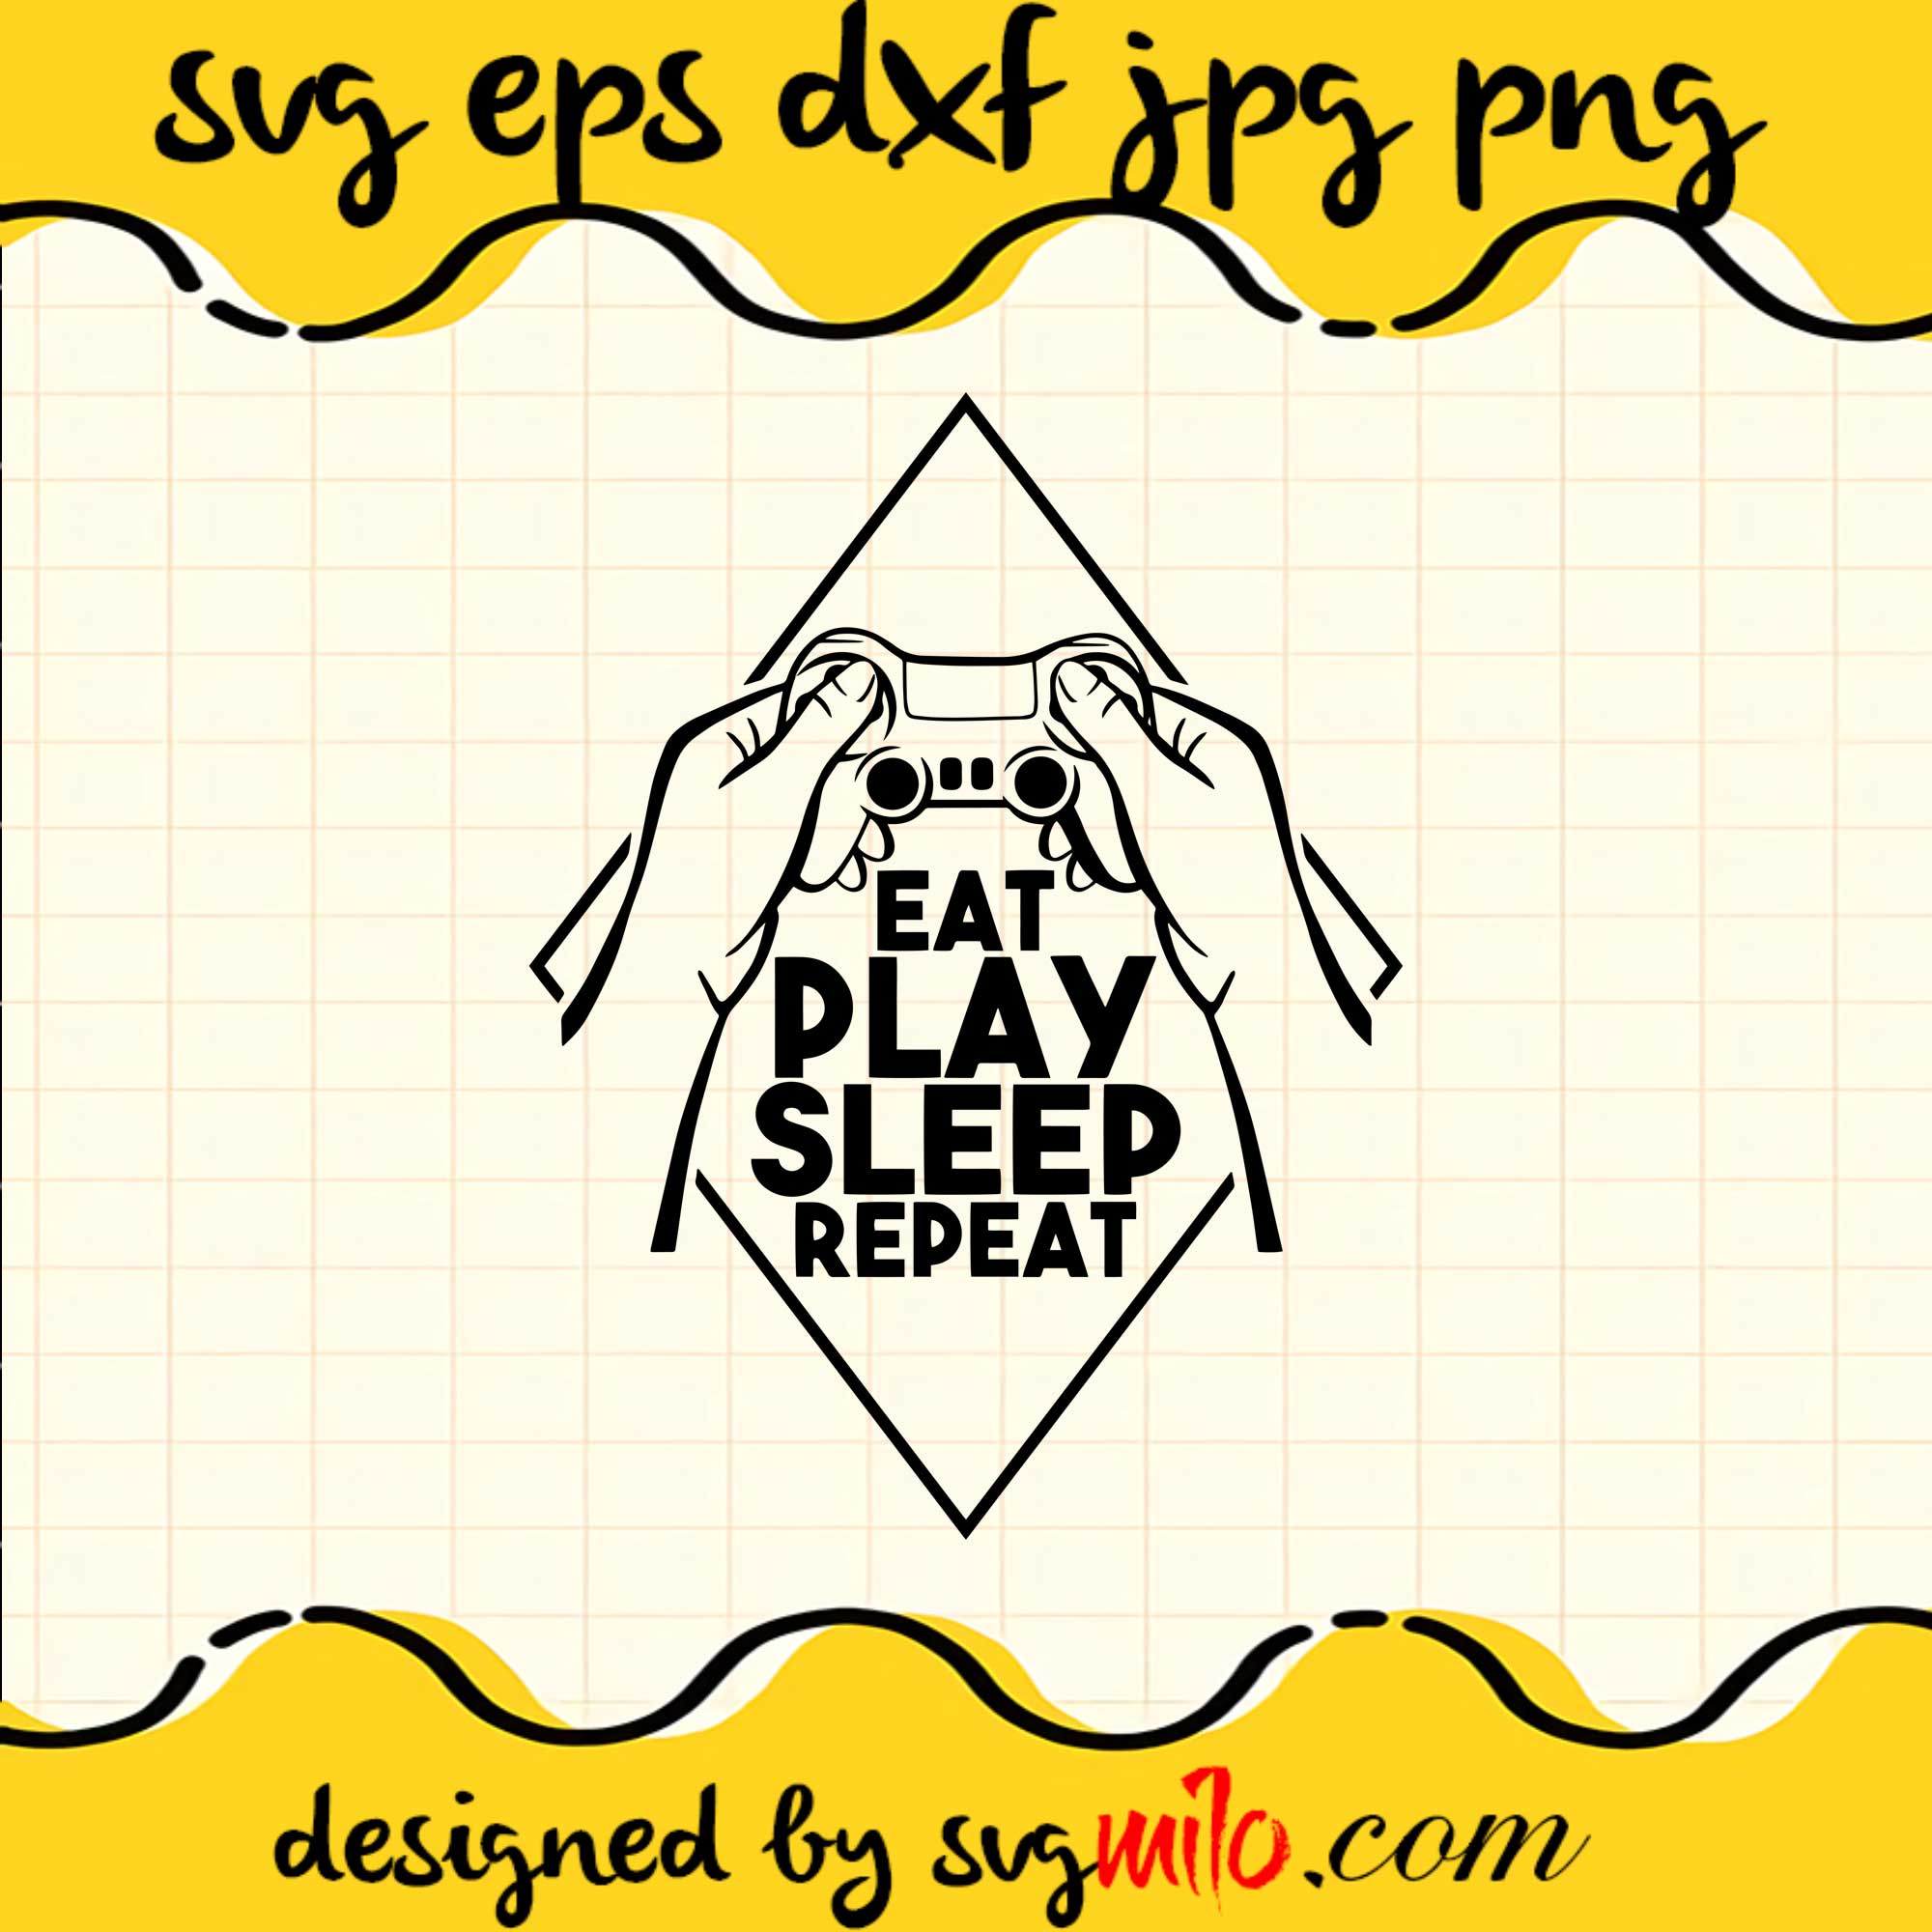 Eat Play Sleep Repeat SVG PNG DXF EPS Cut Files For Cricut Silhouette,Premium quality SVG - SVGMILO